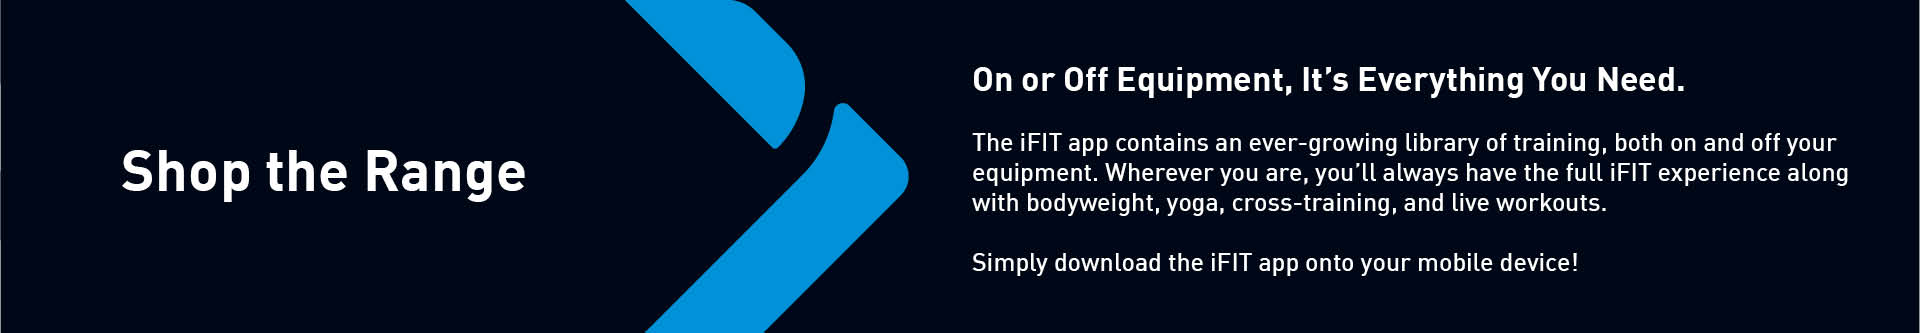 iFit At Home Fitness with Intersport Elverys